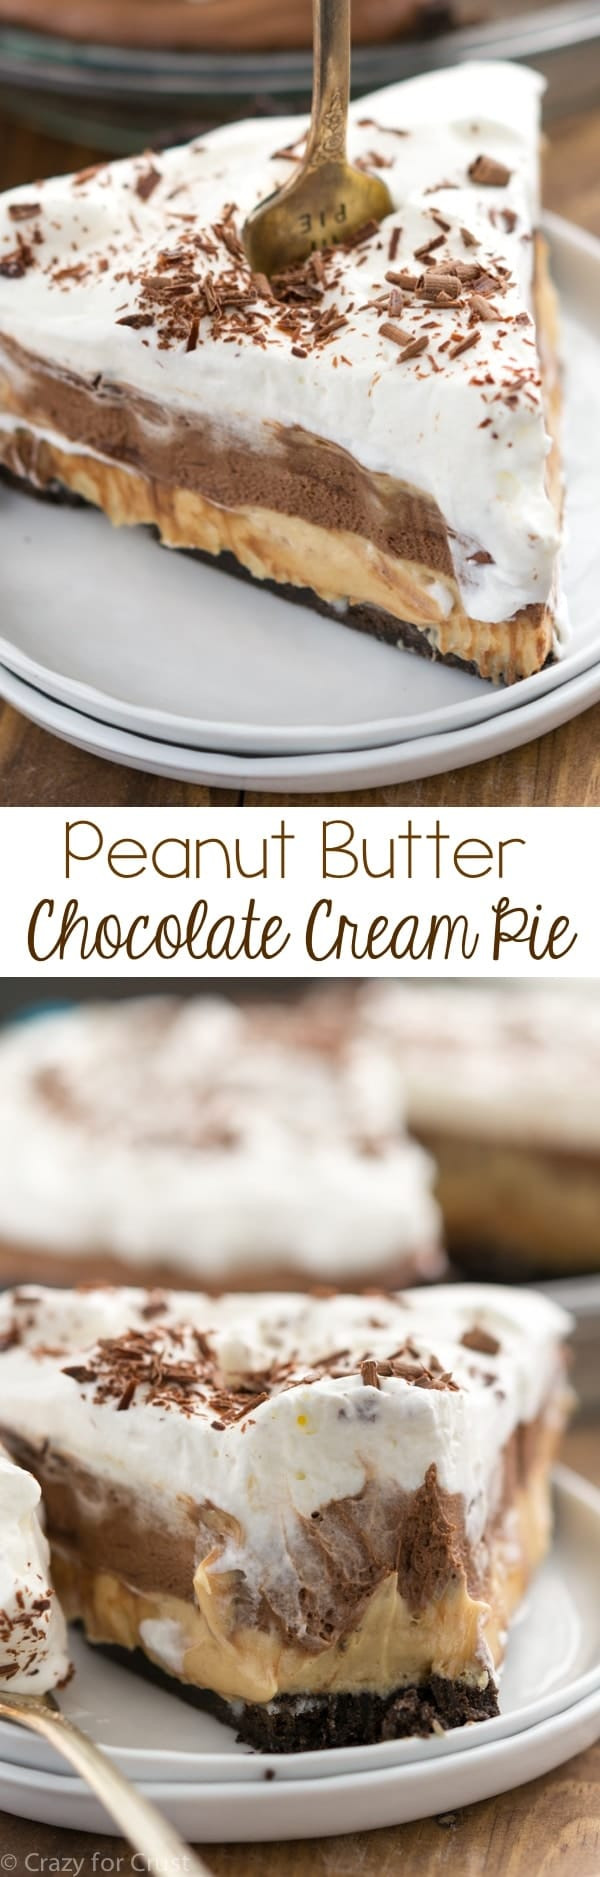 Peanut Butter Pie Without Cool Whip
 No Bake Peanut Butter Chocolate Cream Pie Crazy for Crust